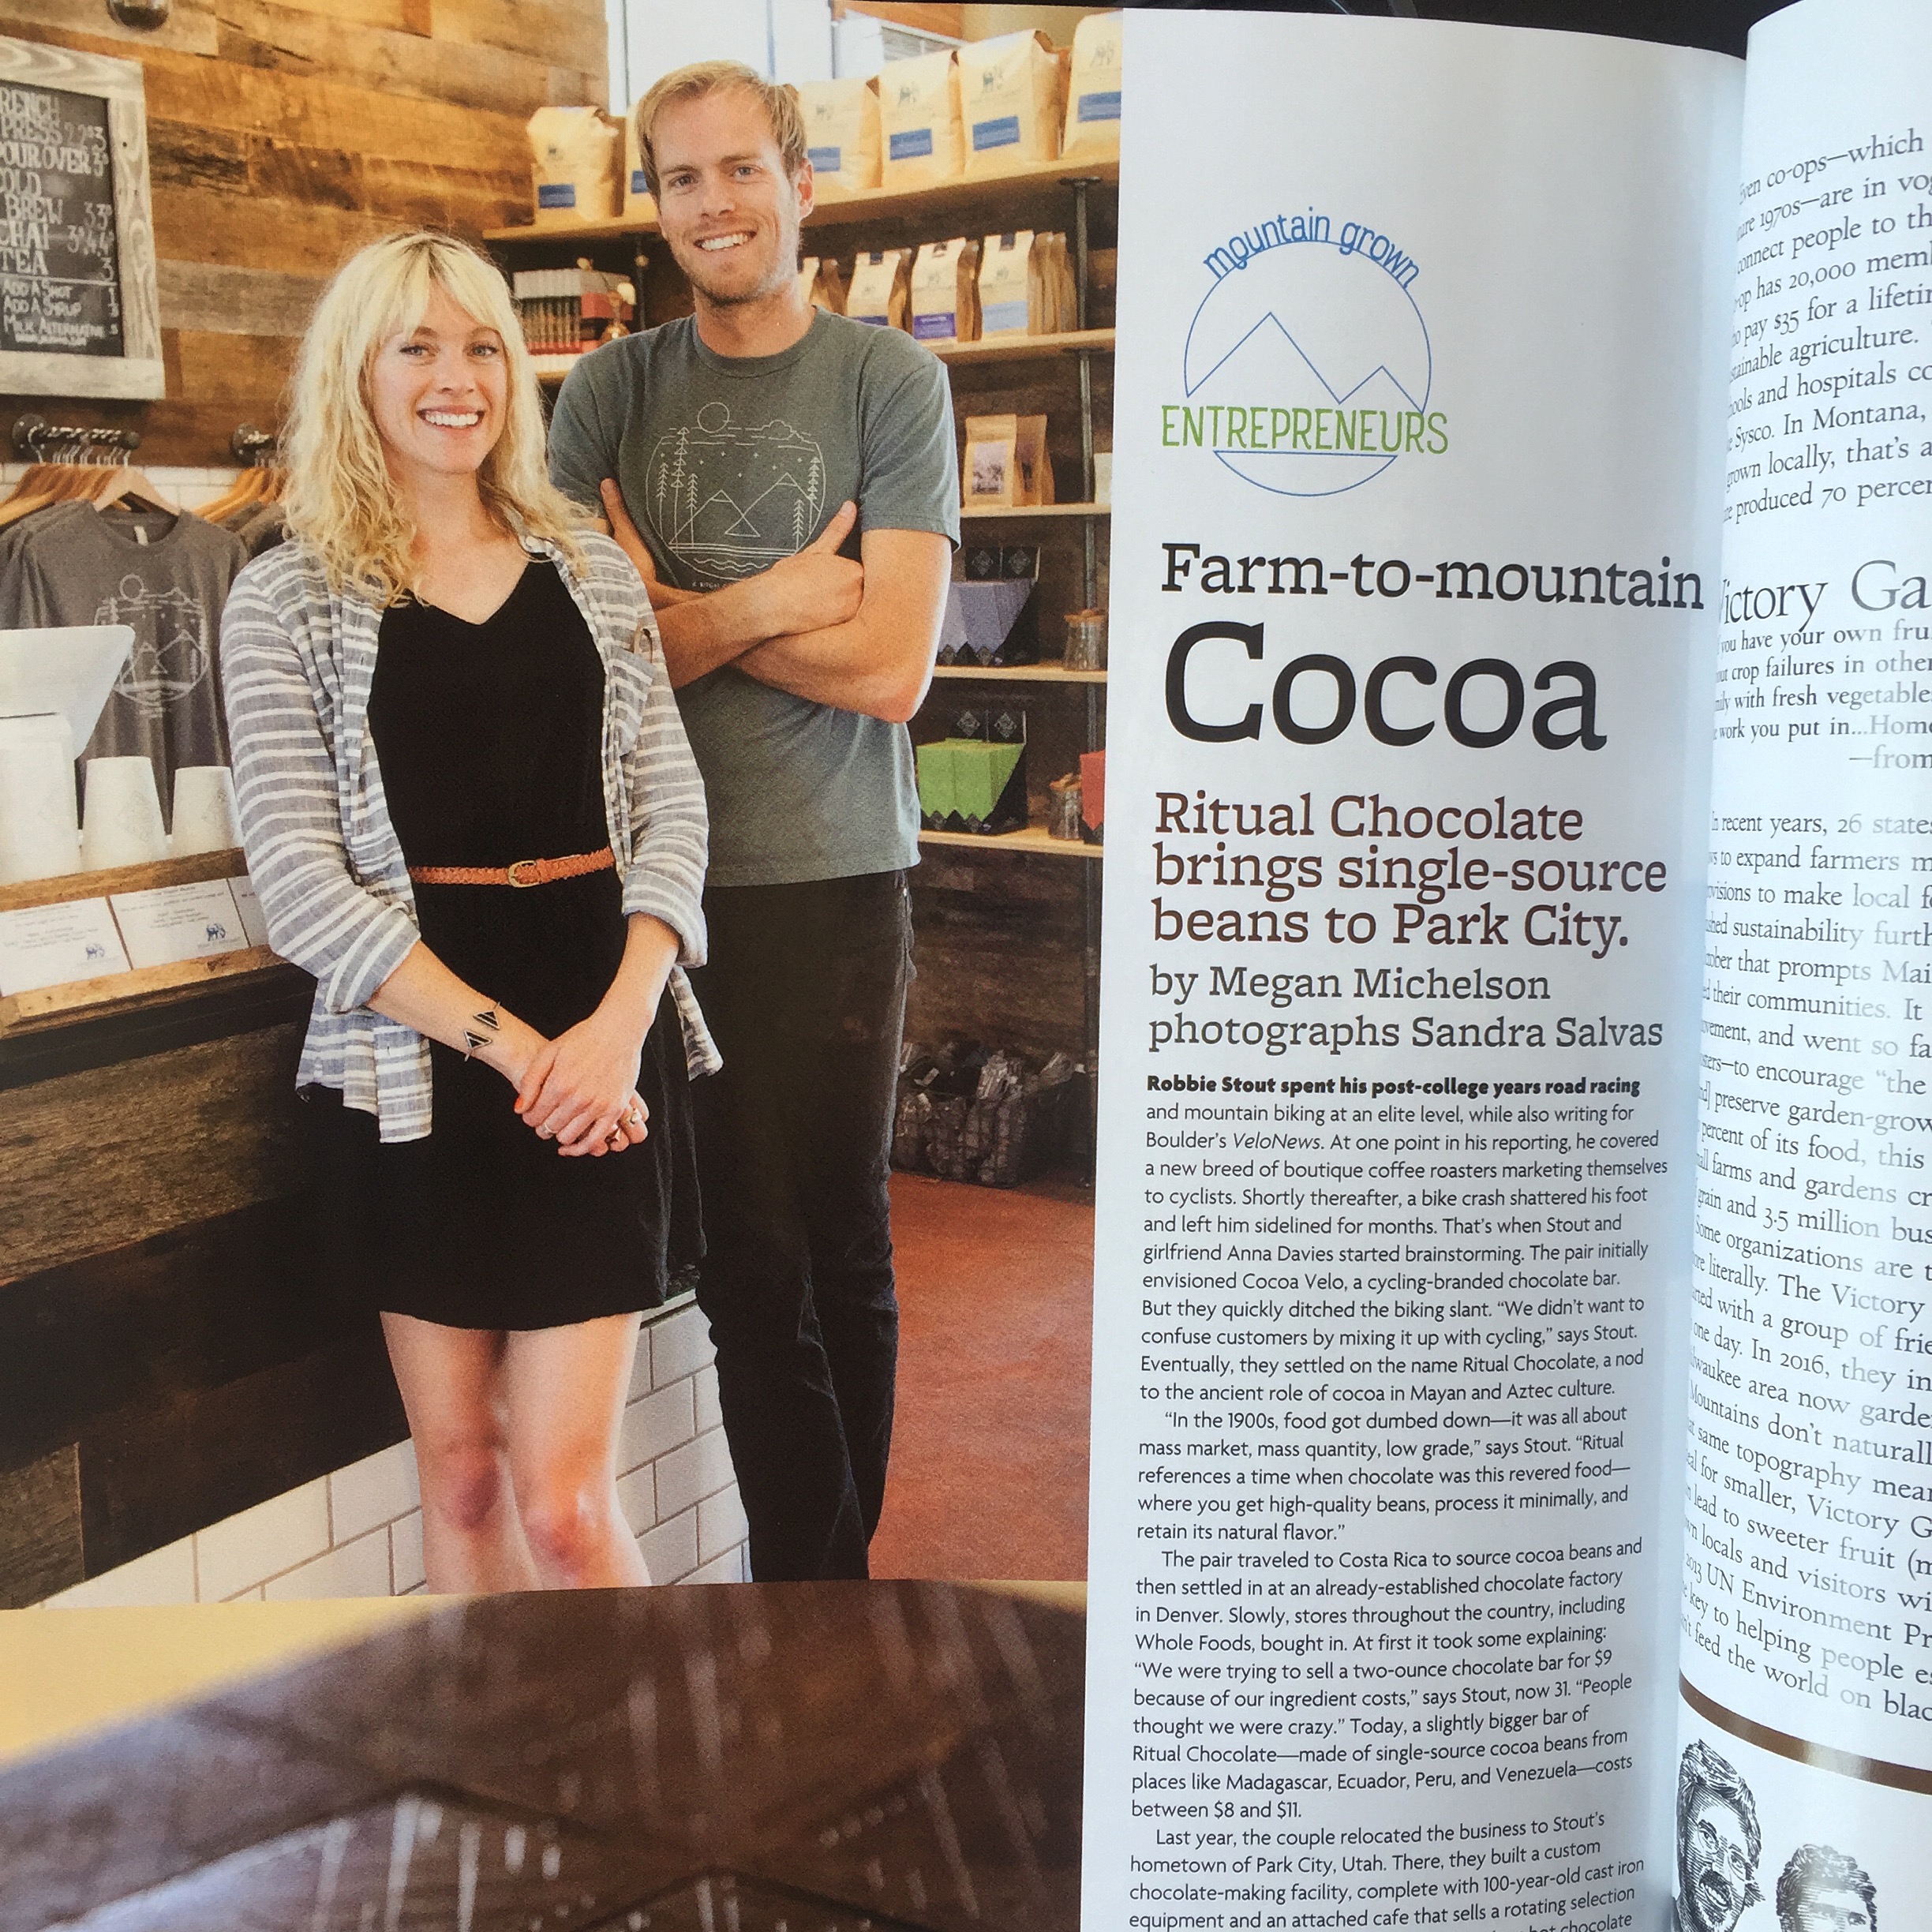 Robbie Stout and Anna Davies (co-owners) of Ritual Chocolate, featured in Mountain Magazine (click image to view full article).